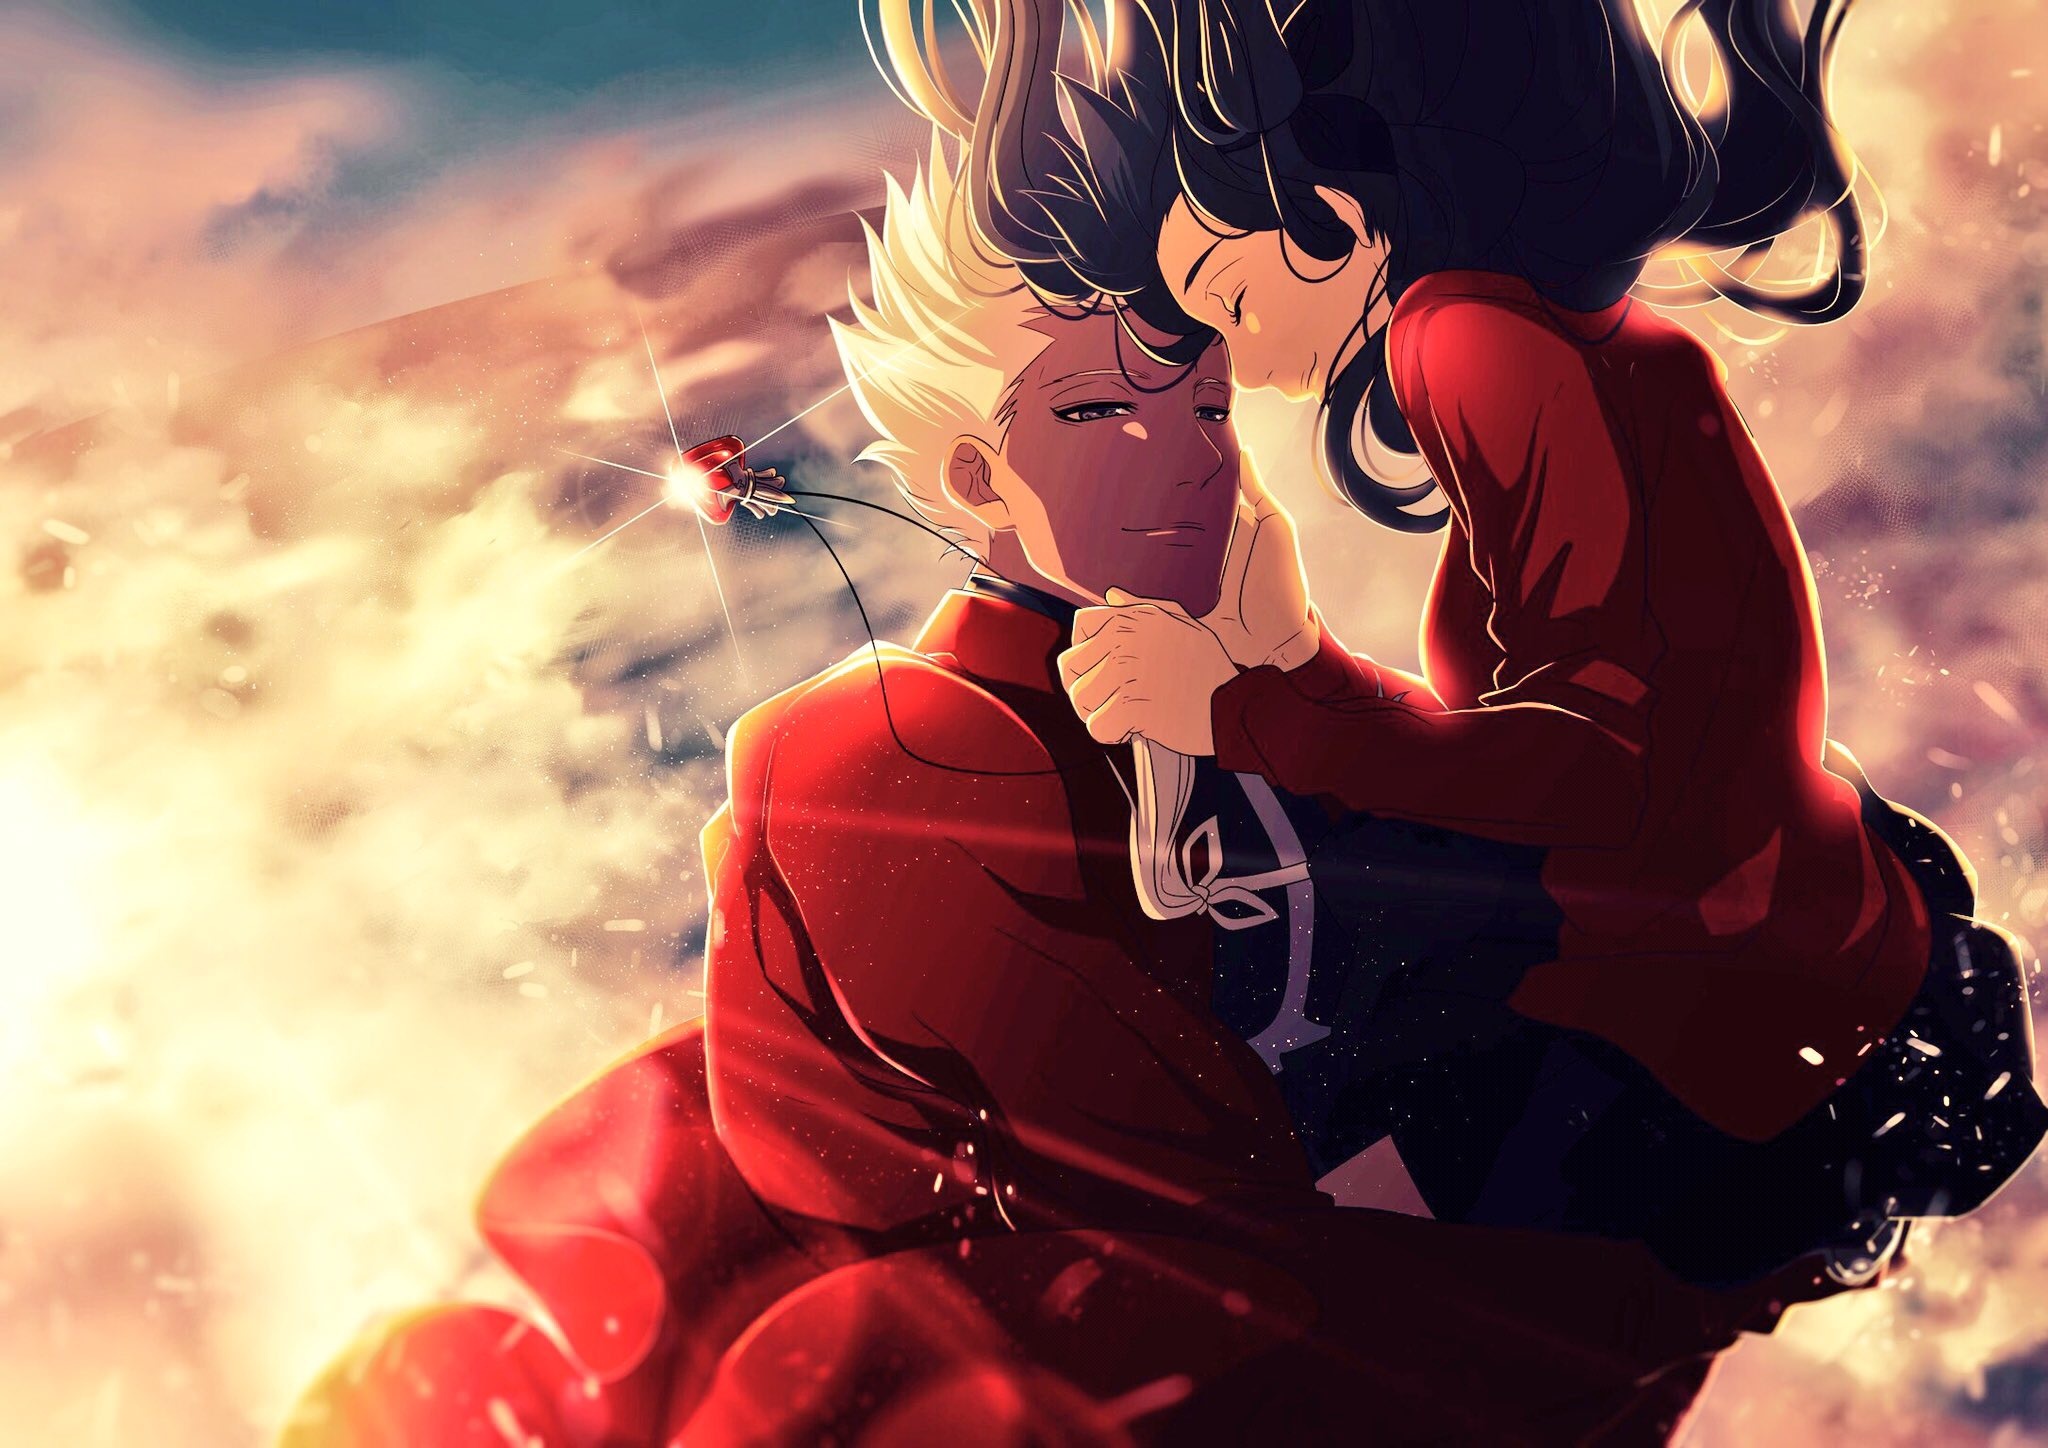 Fate/stay night: Unlimited Blade Works, Fate series wallpaper, Archer and Tohsaka Rin, Stunning visuals, 2050x1450 HD Desktop